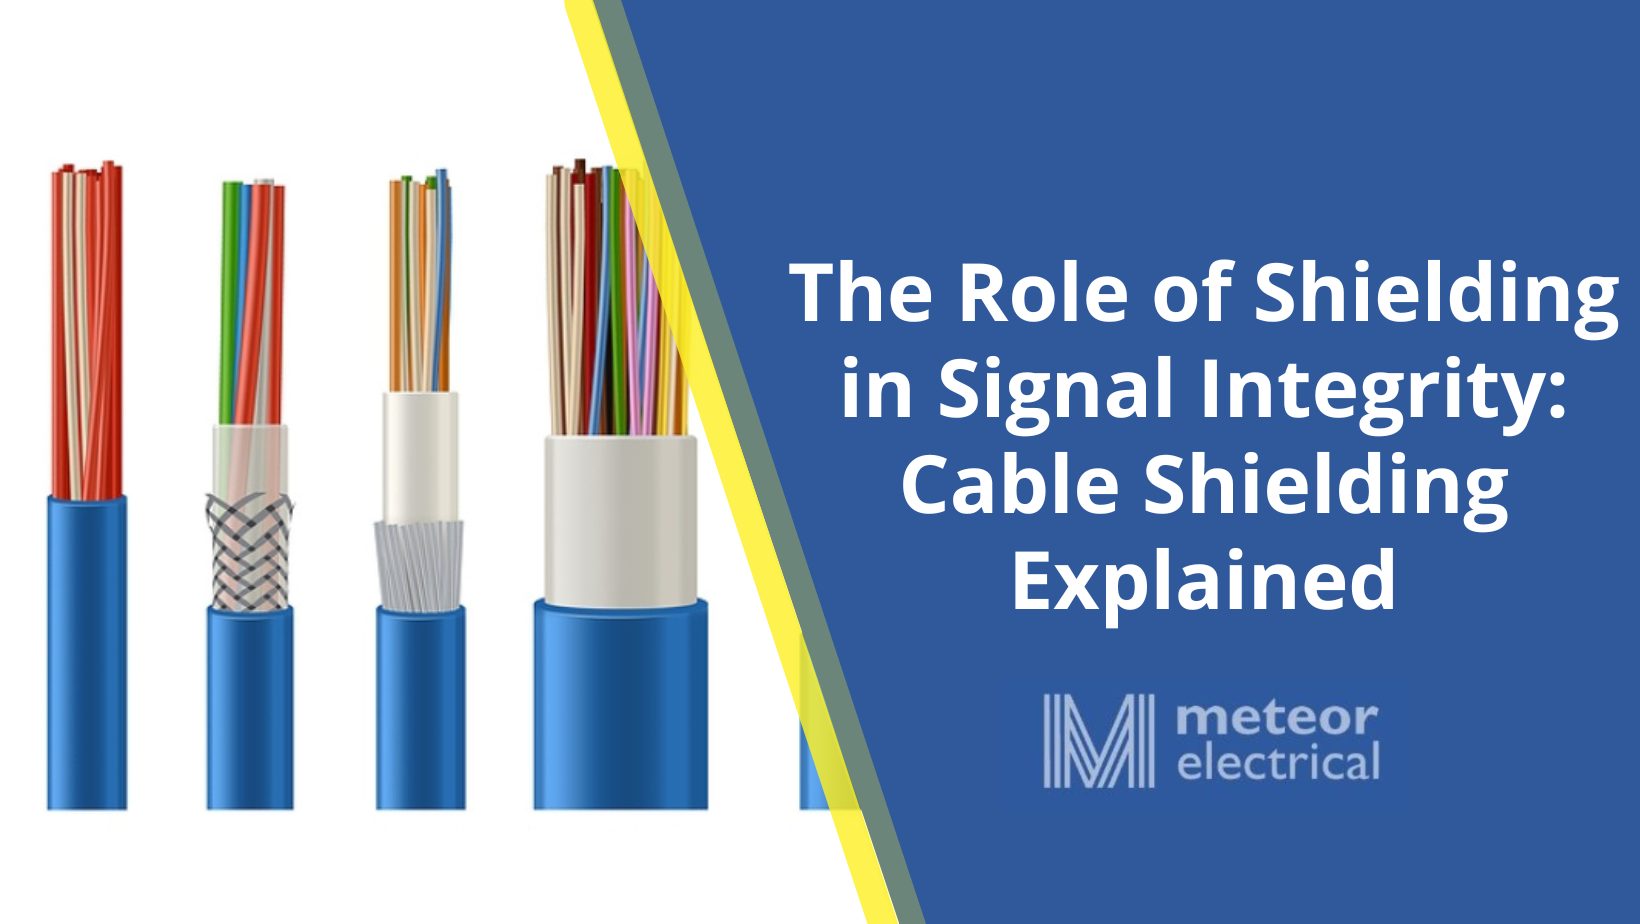 The Role of Shielding in Signal Integrity: Cable Shielding Explained